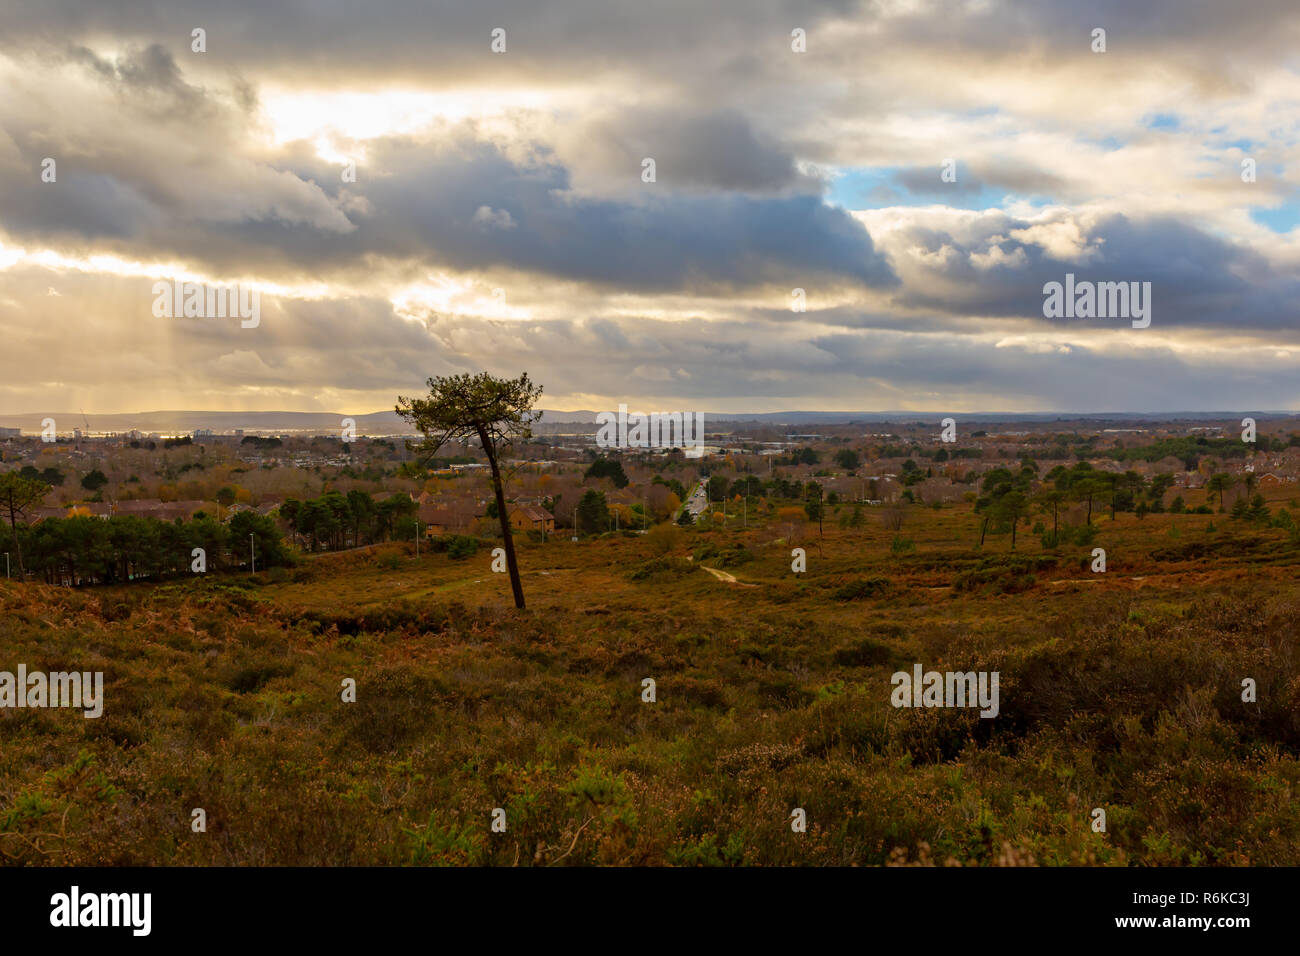 Landscape photograph taken on Canford heath nature reserve looking out onto Poole town under a dramatic cloudy sky. Stock Photo